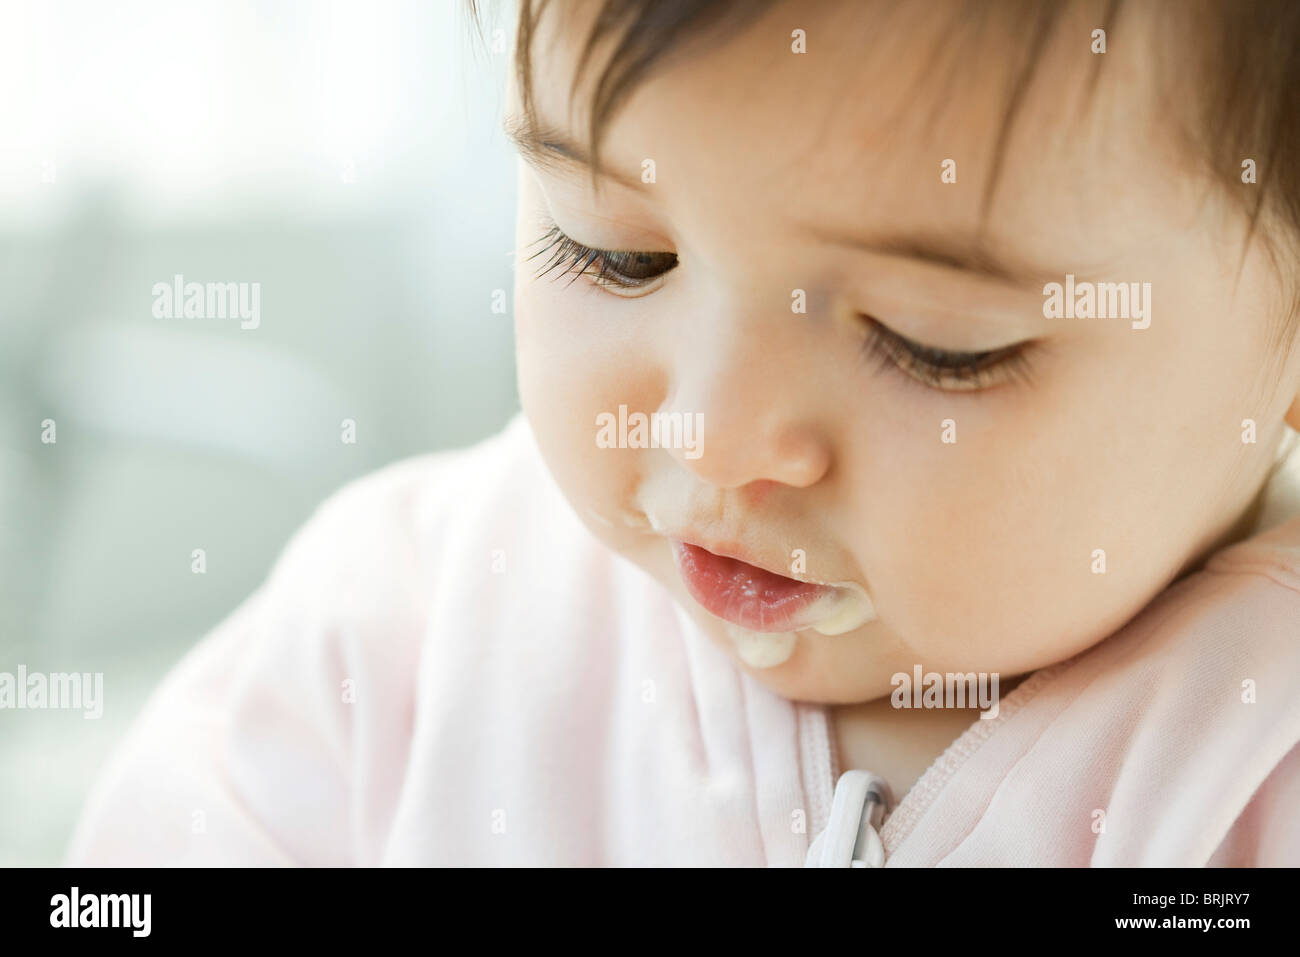 Infant with baby food on her face, portrait Stock Photo